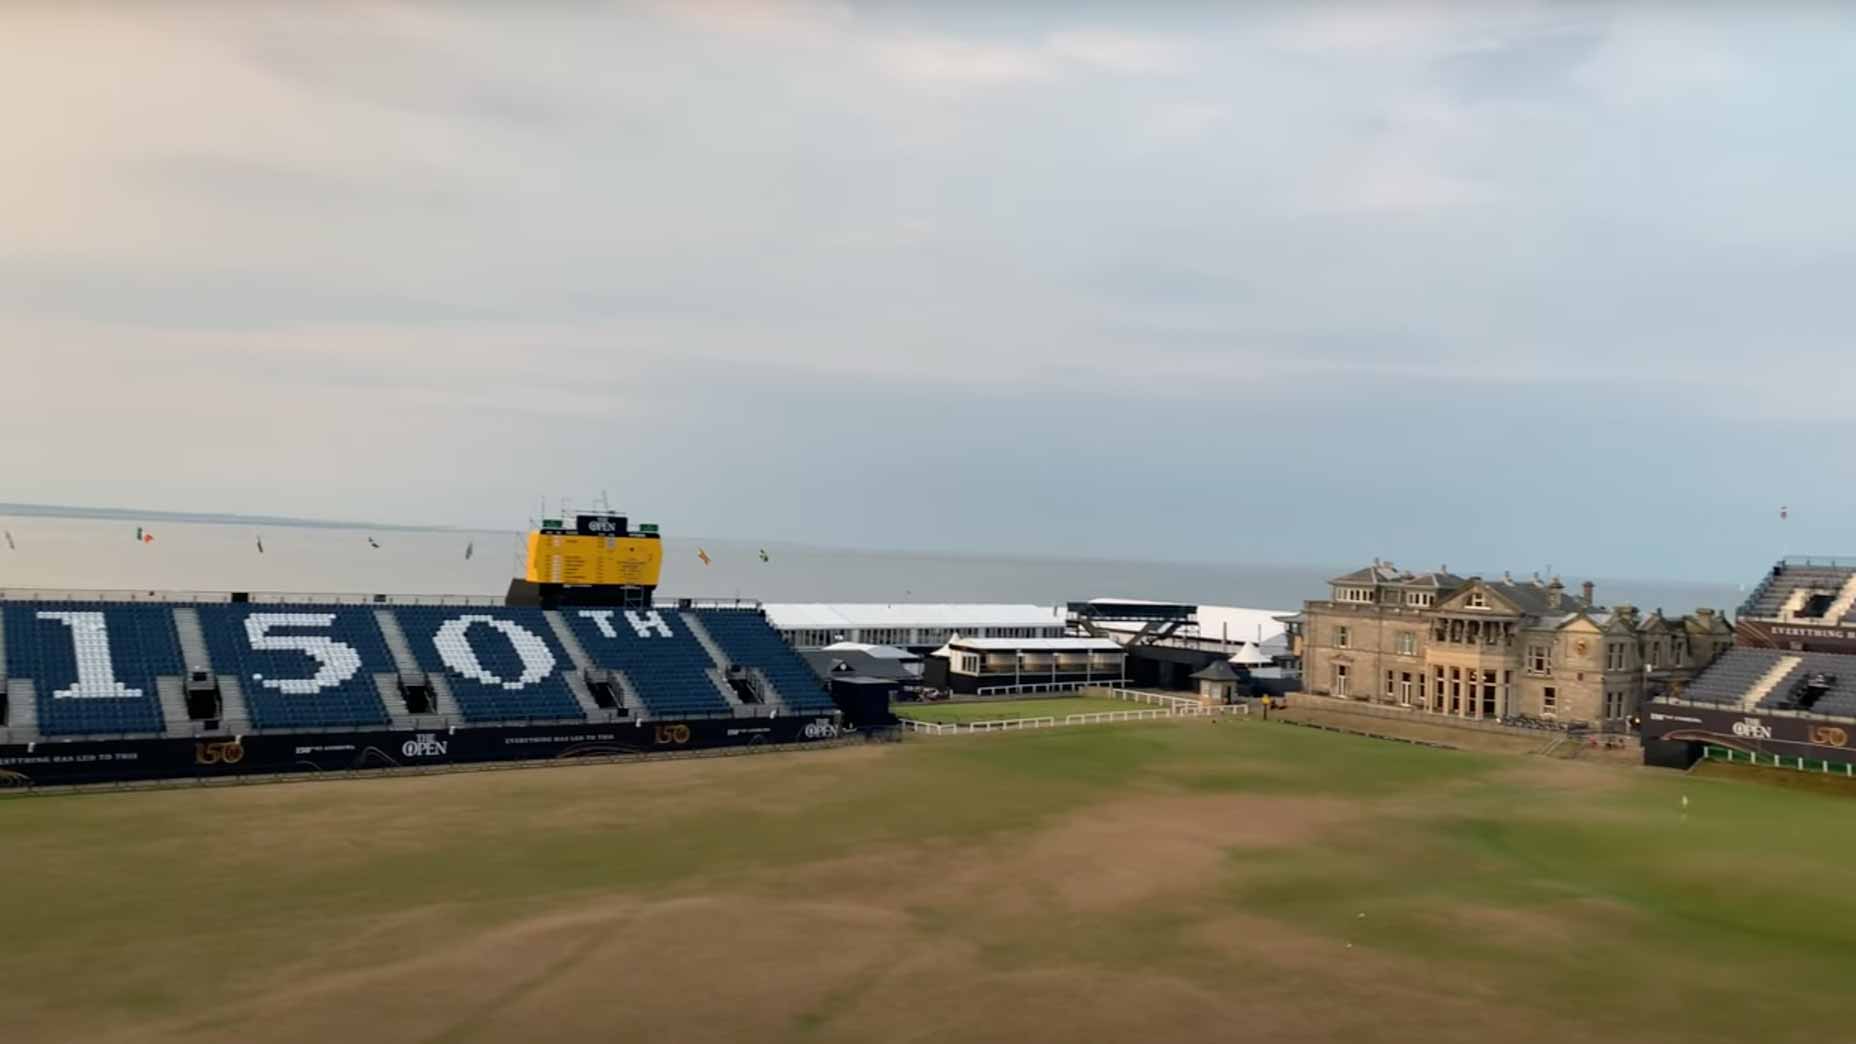 My favorite golf walk of 2022 revealed the other side of St. Andrews